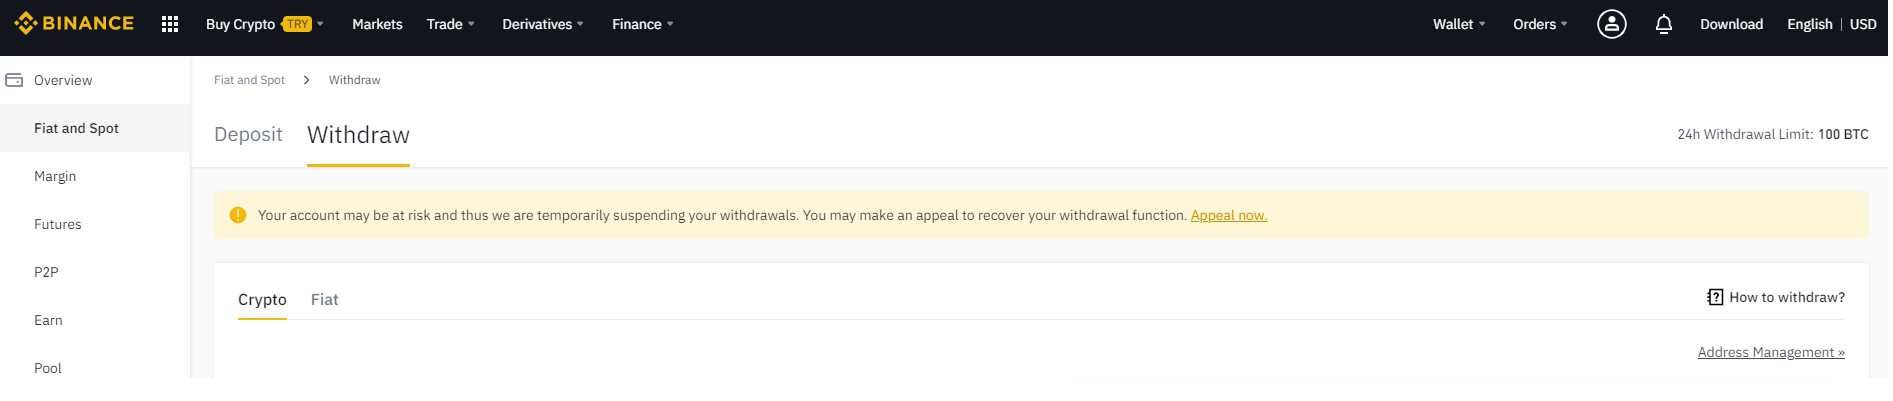 Binance complaint I cannot make withdrawals because of a so called security risk.